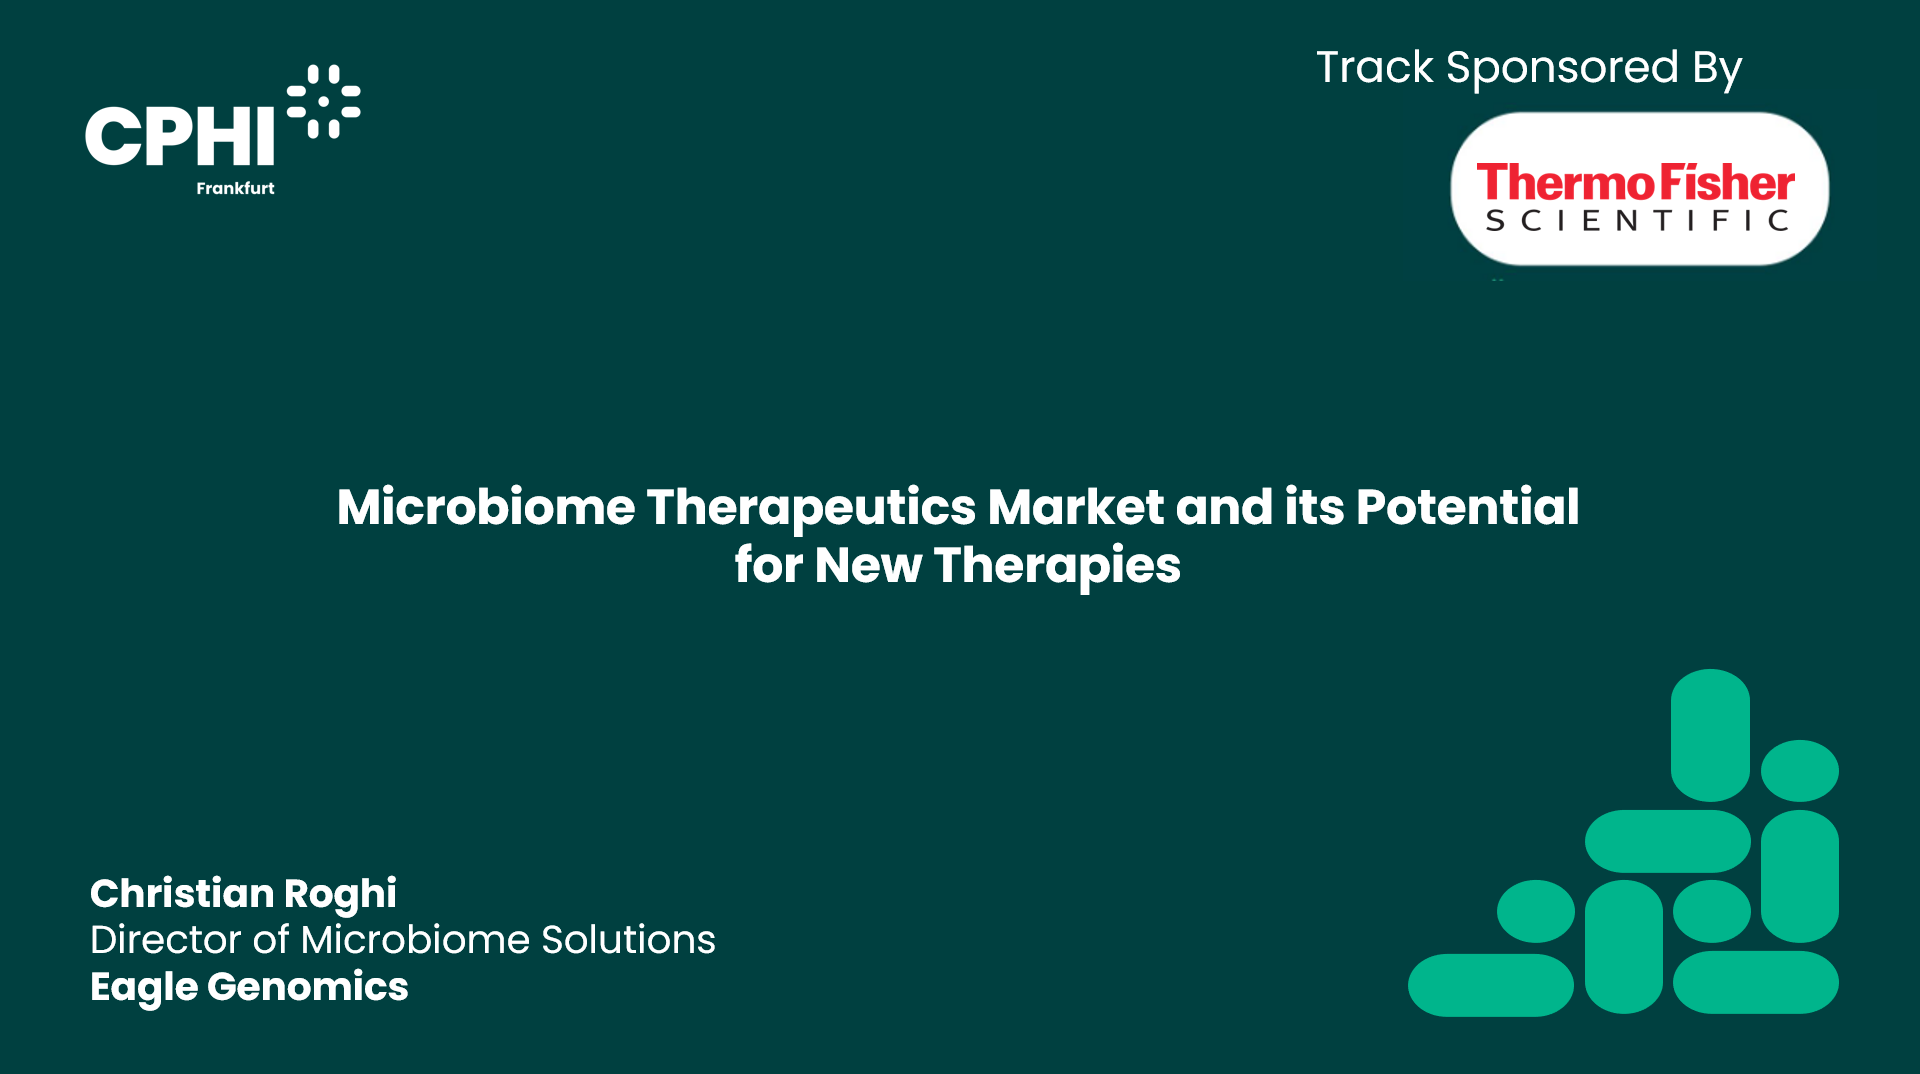 Microbiome Therapeutics Market and its Potential for New Therapies